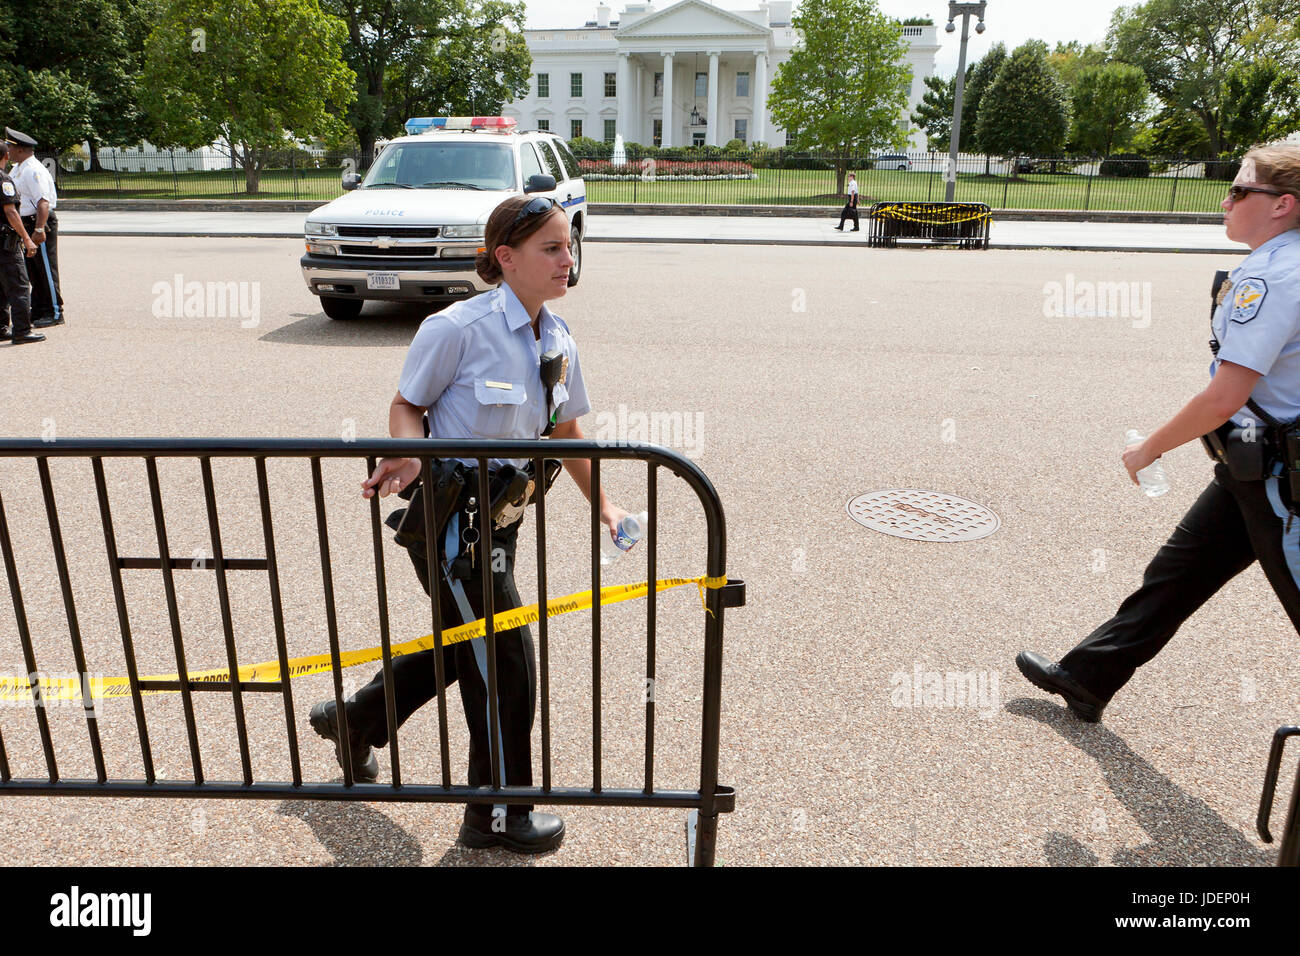 Policewoman moving police fence (barricade fence) in preparation of a public protest in front of the White House - Washington, DC USA Stock Photo